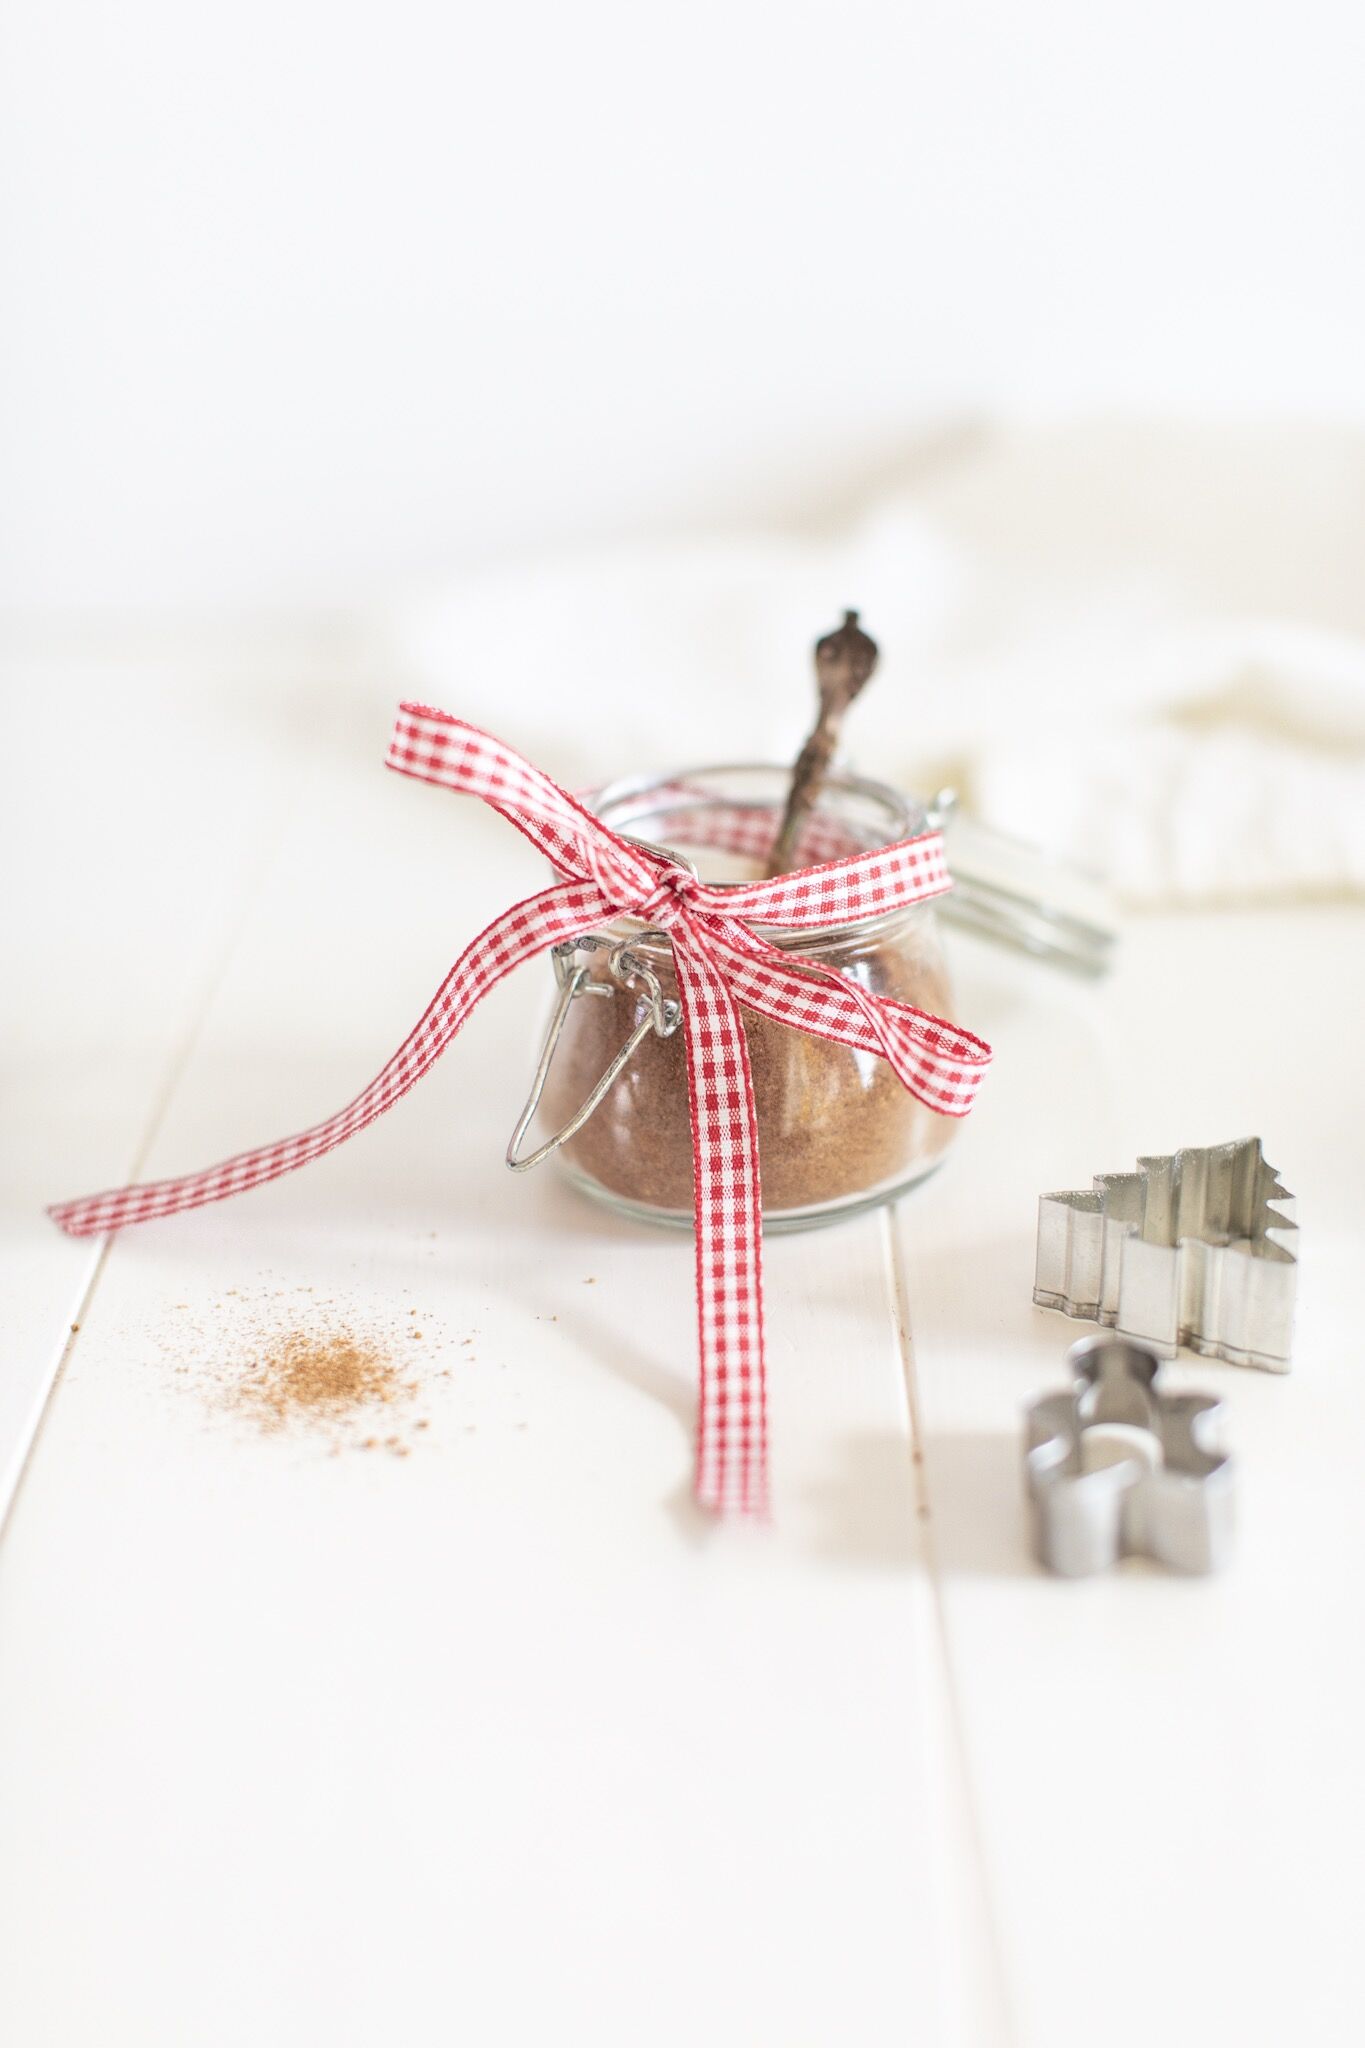 DIY Gingerbread Spice- what a sweet little zero-waste hostess gift!